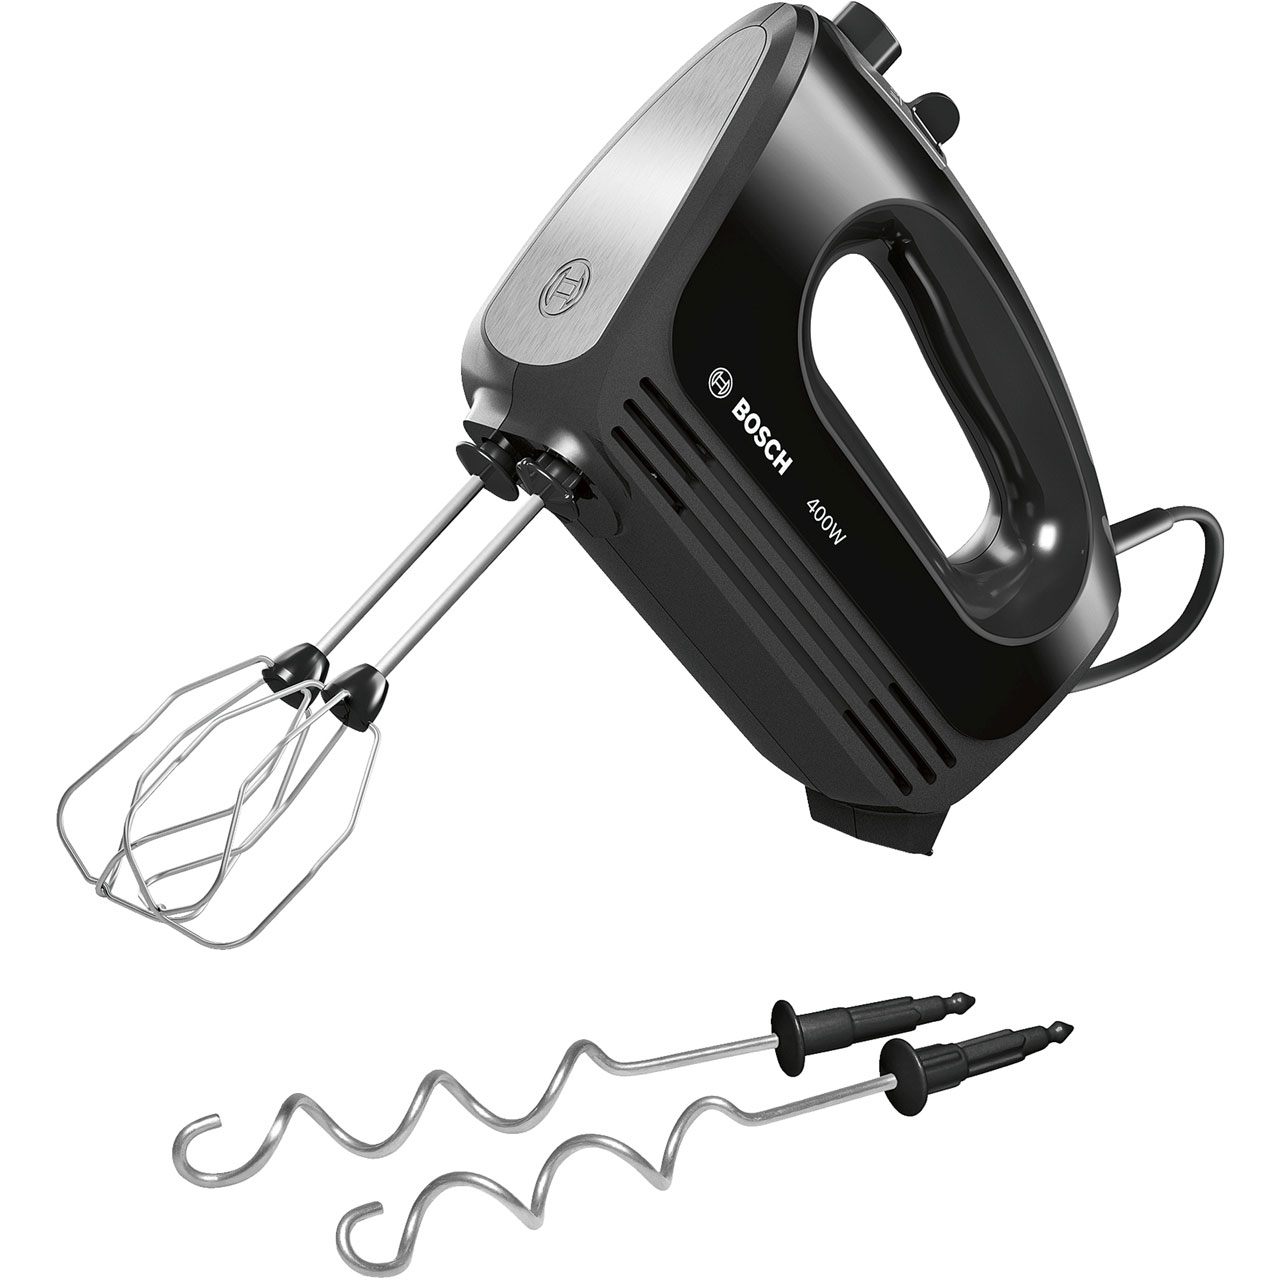 Bosch MFQ2420BGB Hand Mixer with 4 Accessories Review